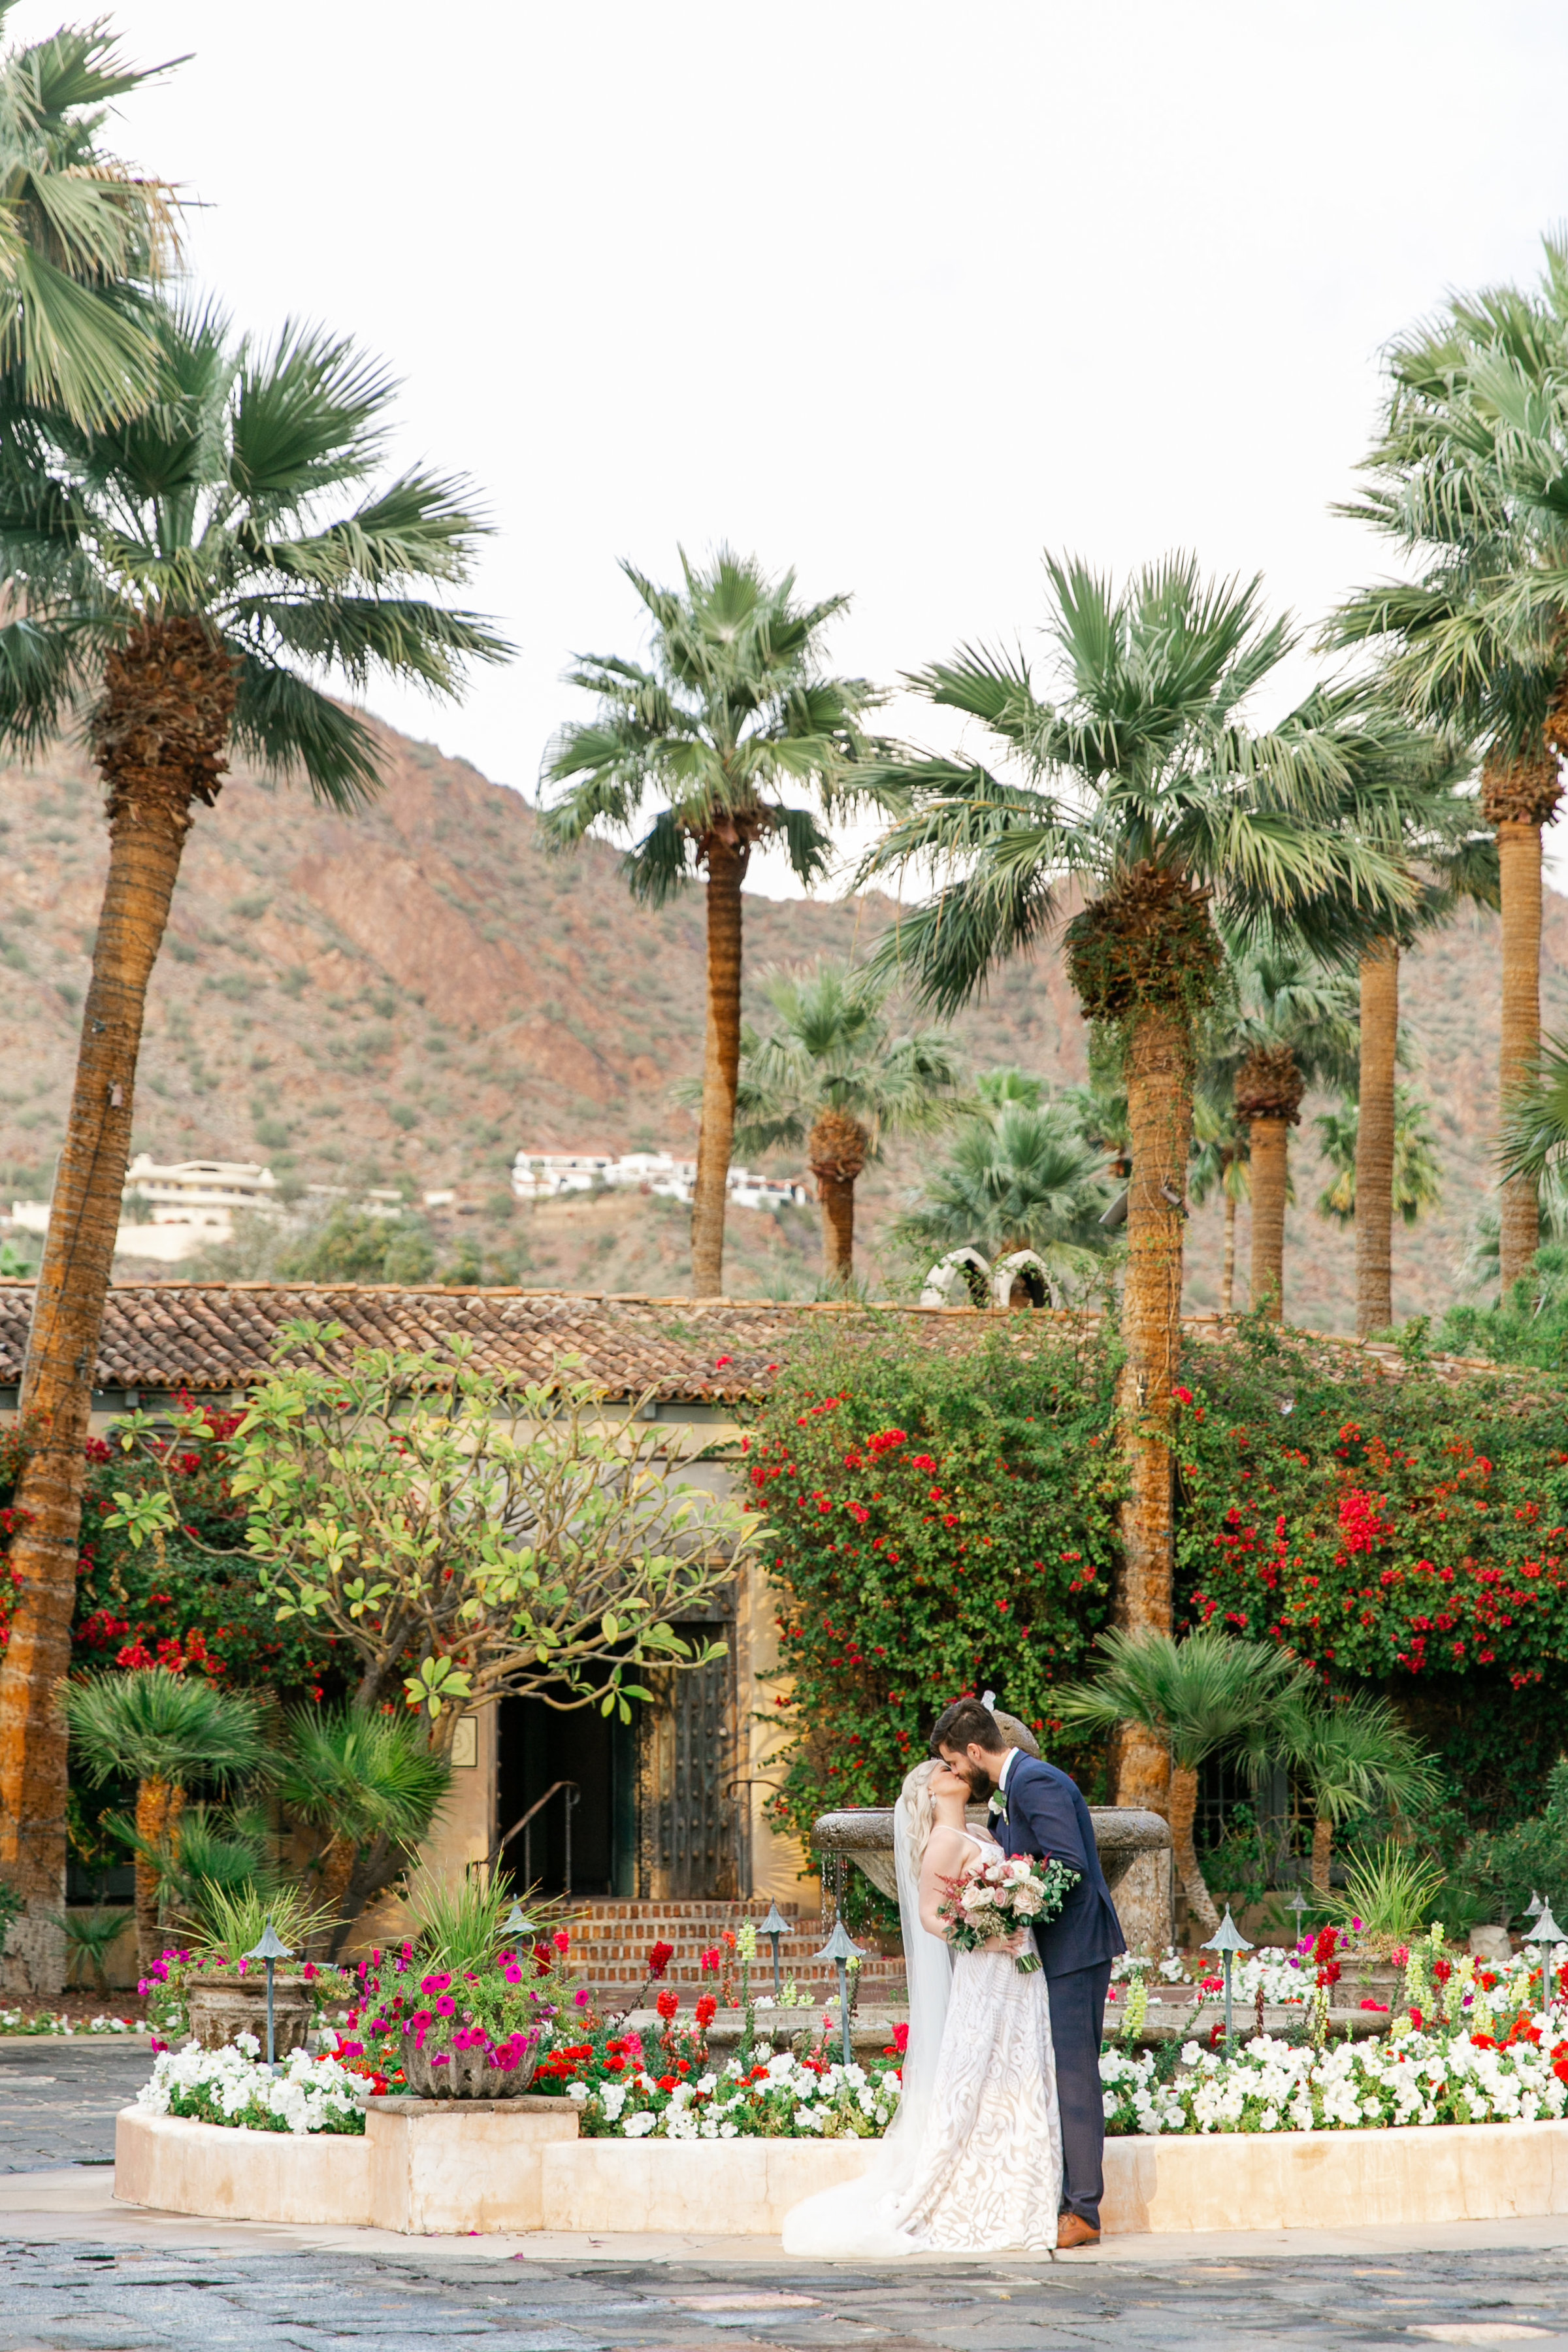 Karlie Colleen Photography - The Royal Palms Wedding - Some Like It Classic - Alex & Sam-584